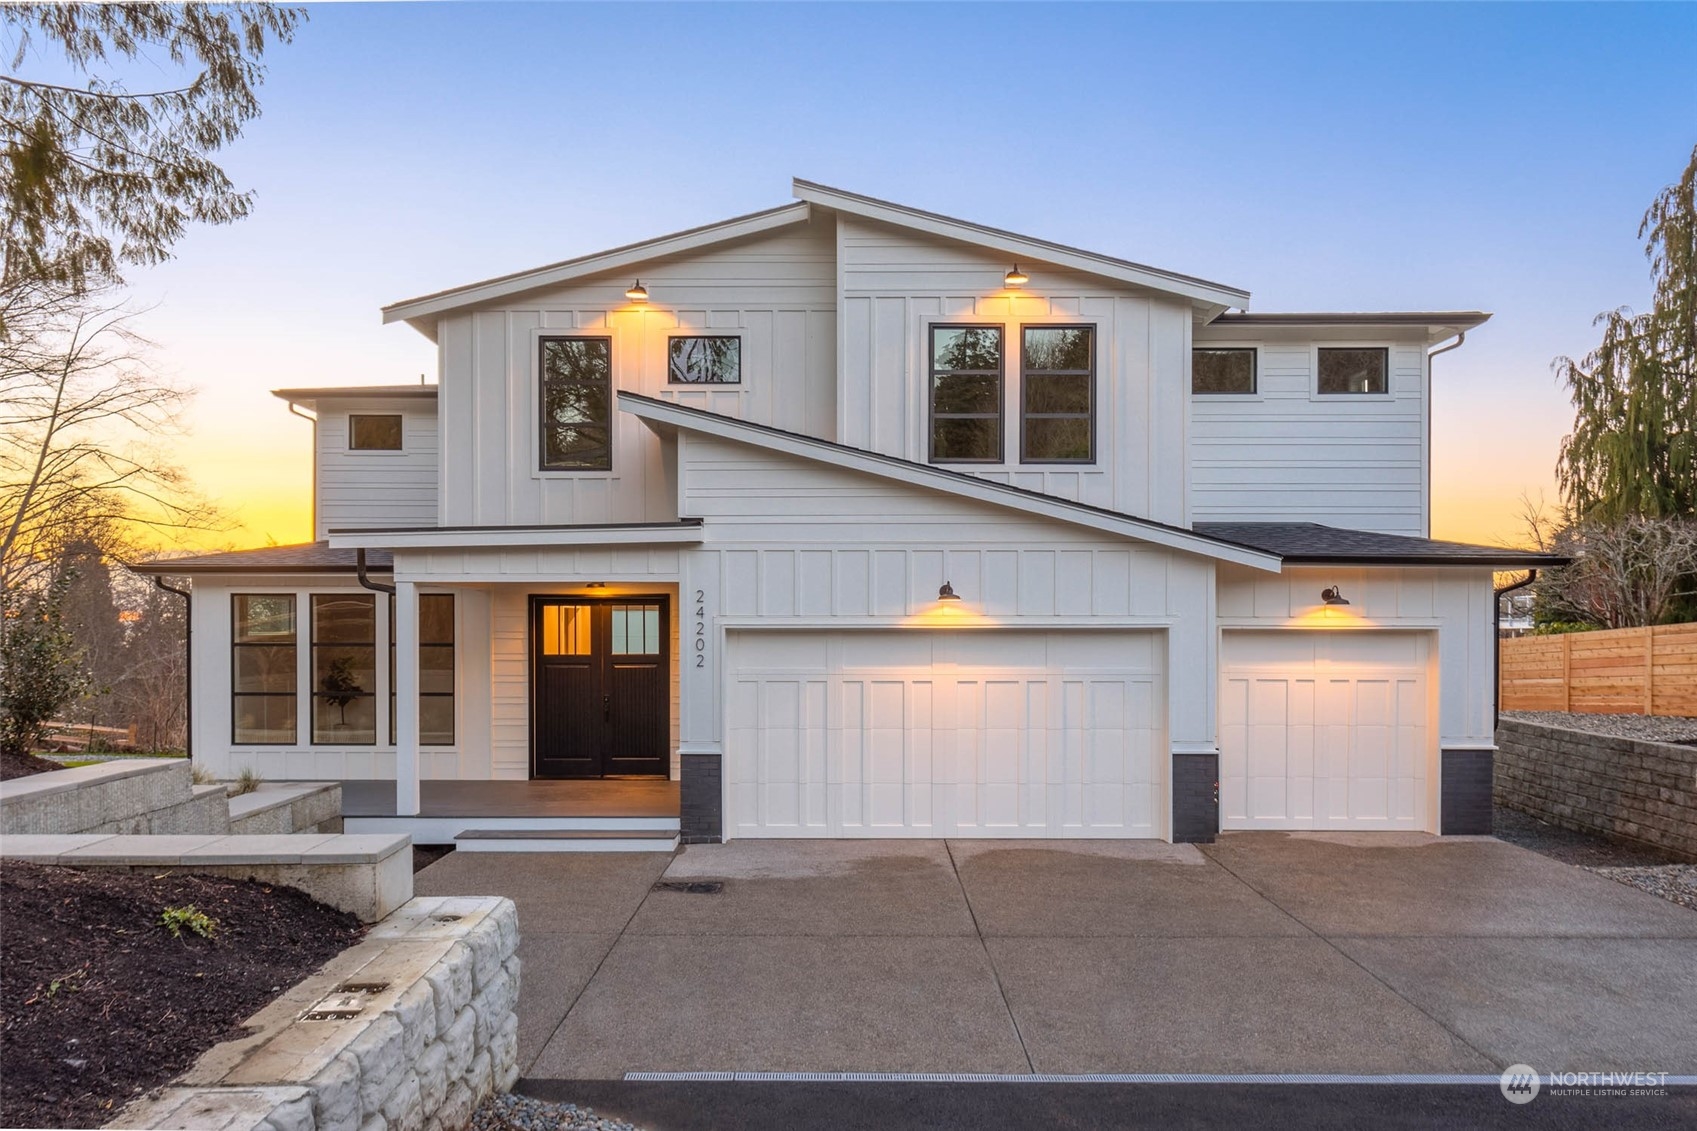 Woodway, WA Real Estate Housing Market & Trends | Coldwell Banker